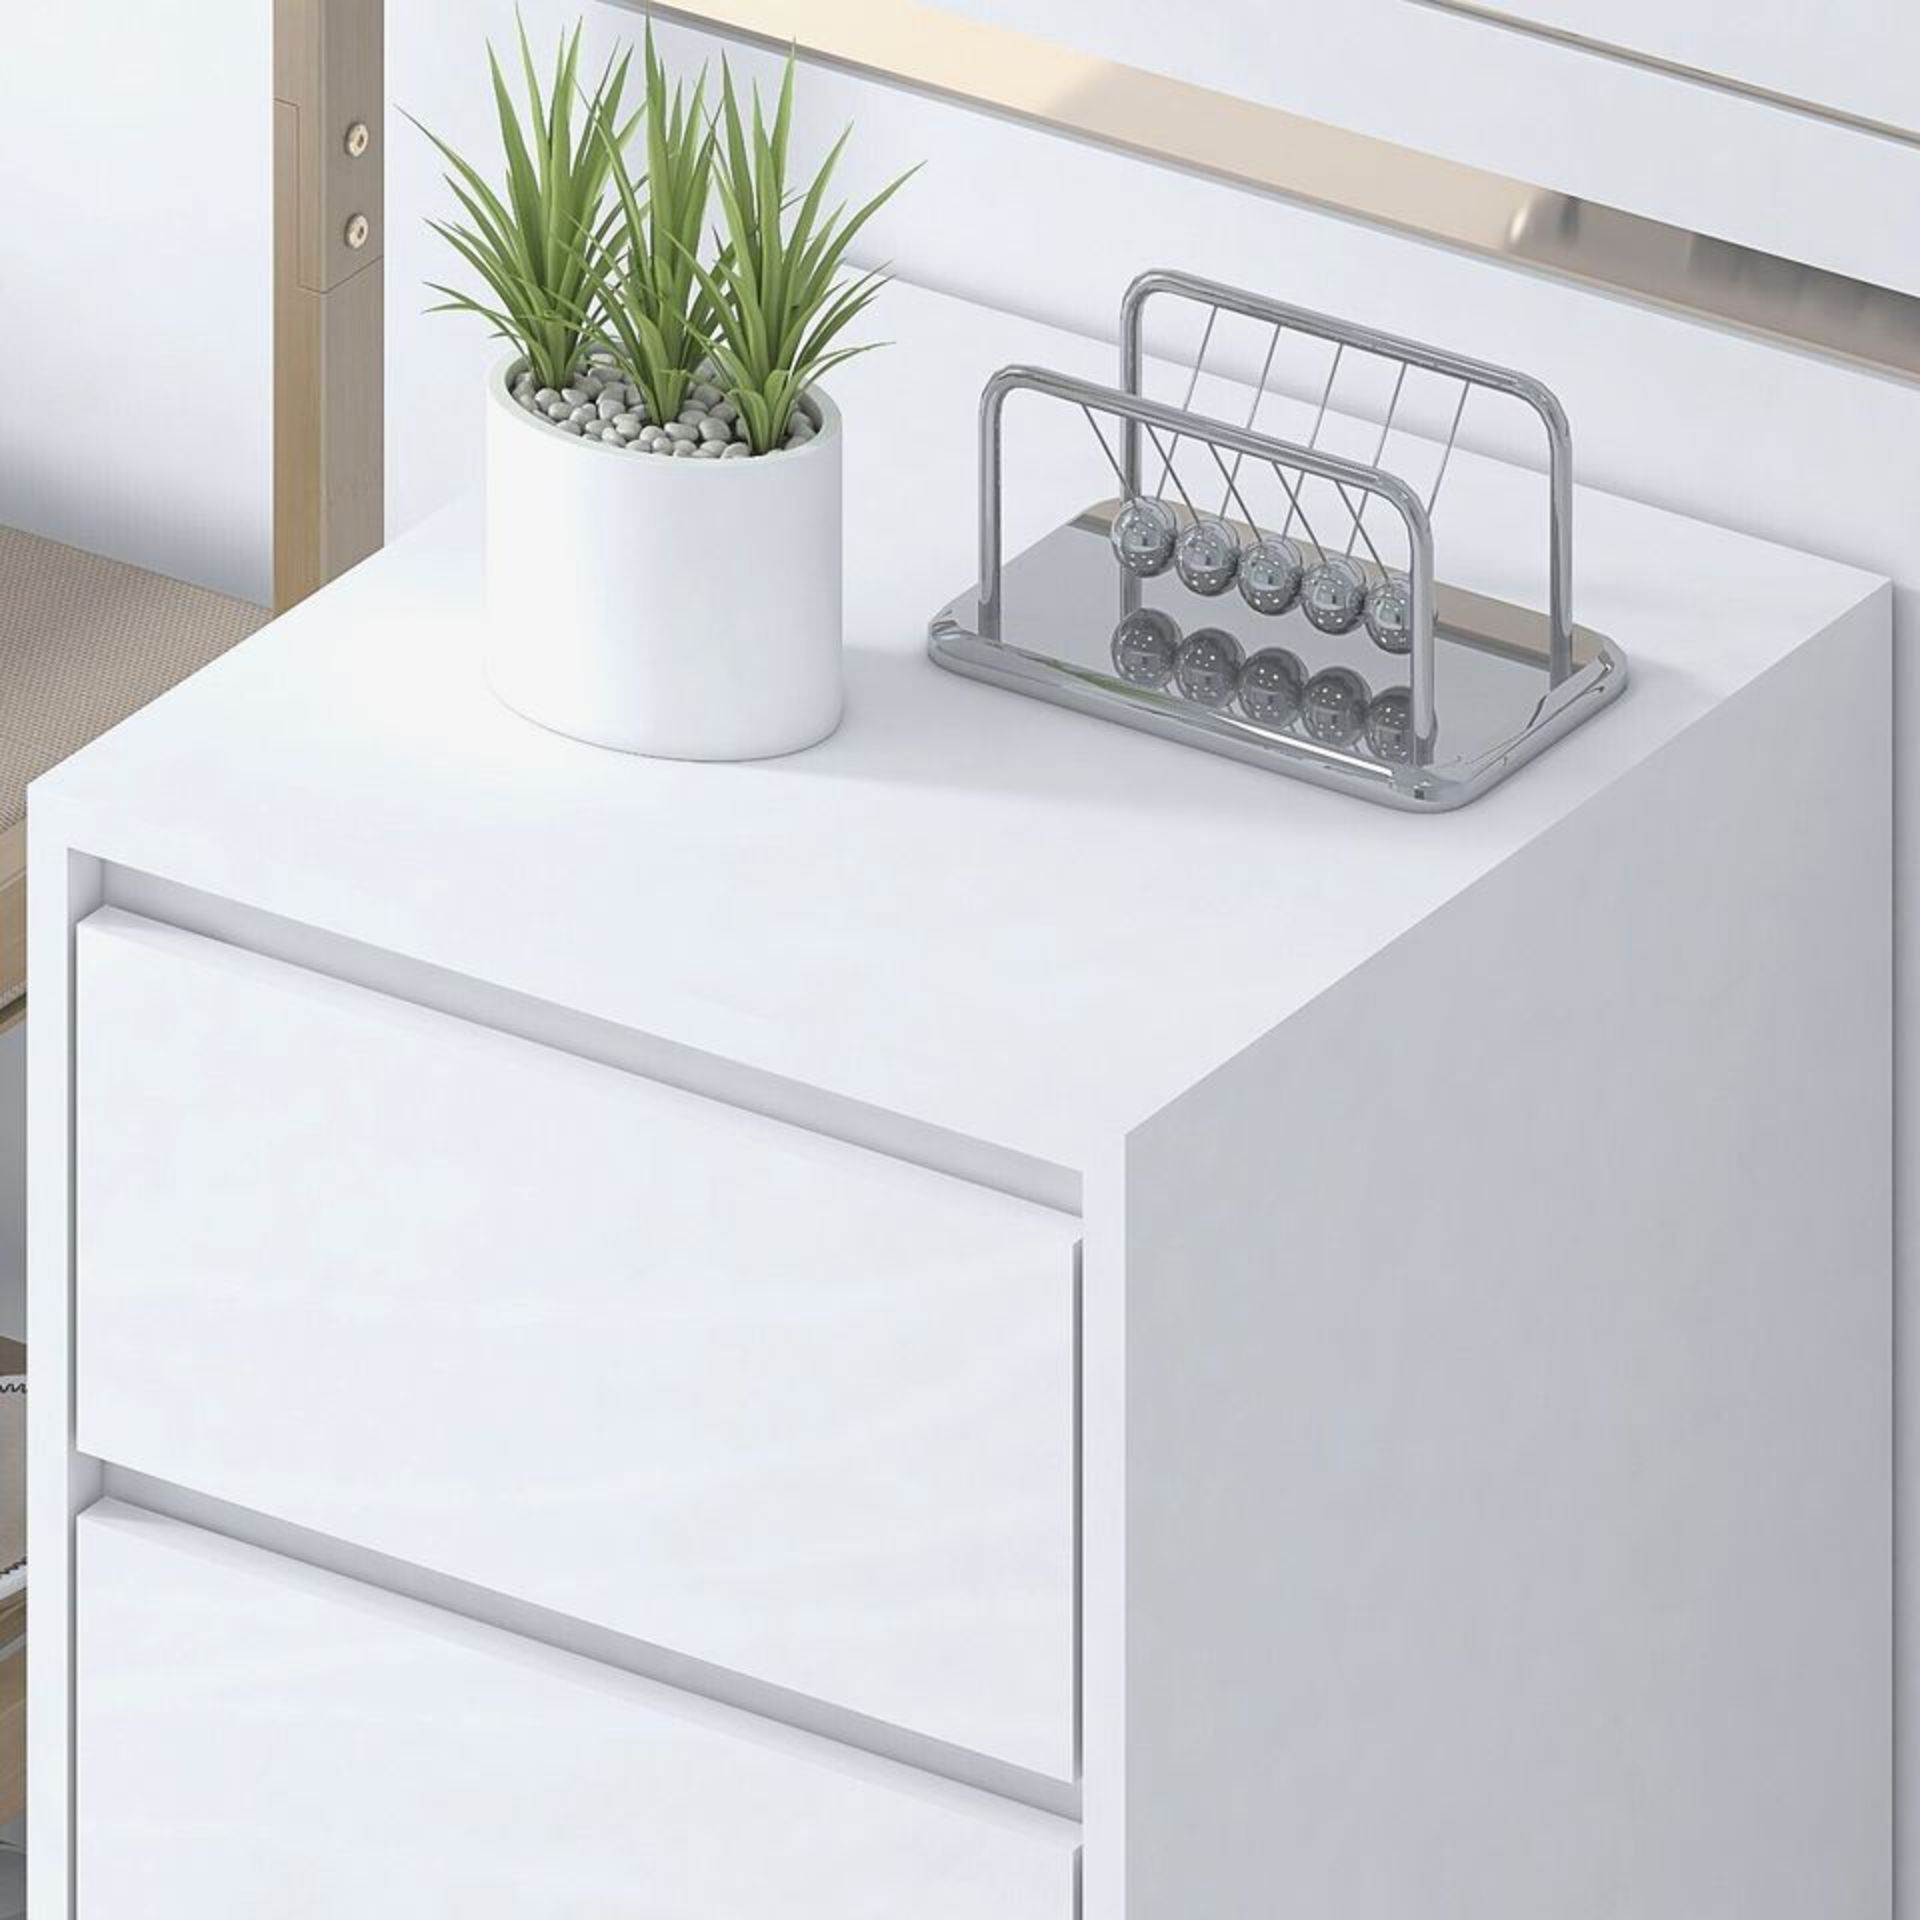 PAIR OF HIGH GLOSS WHITE BEDSIDE CABINET UNIT MODERN HANDLELESS DESIGN - H64CM X W40CM - Image 4 of 9